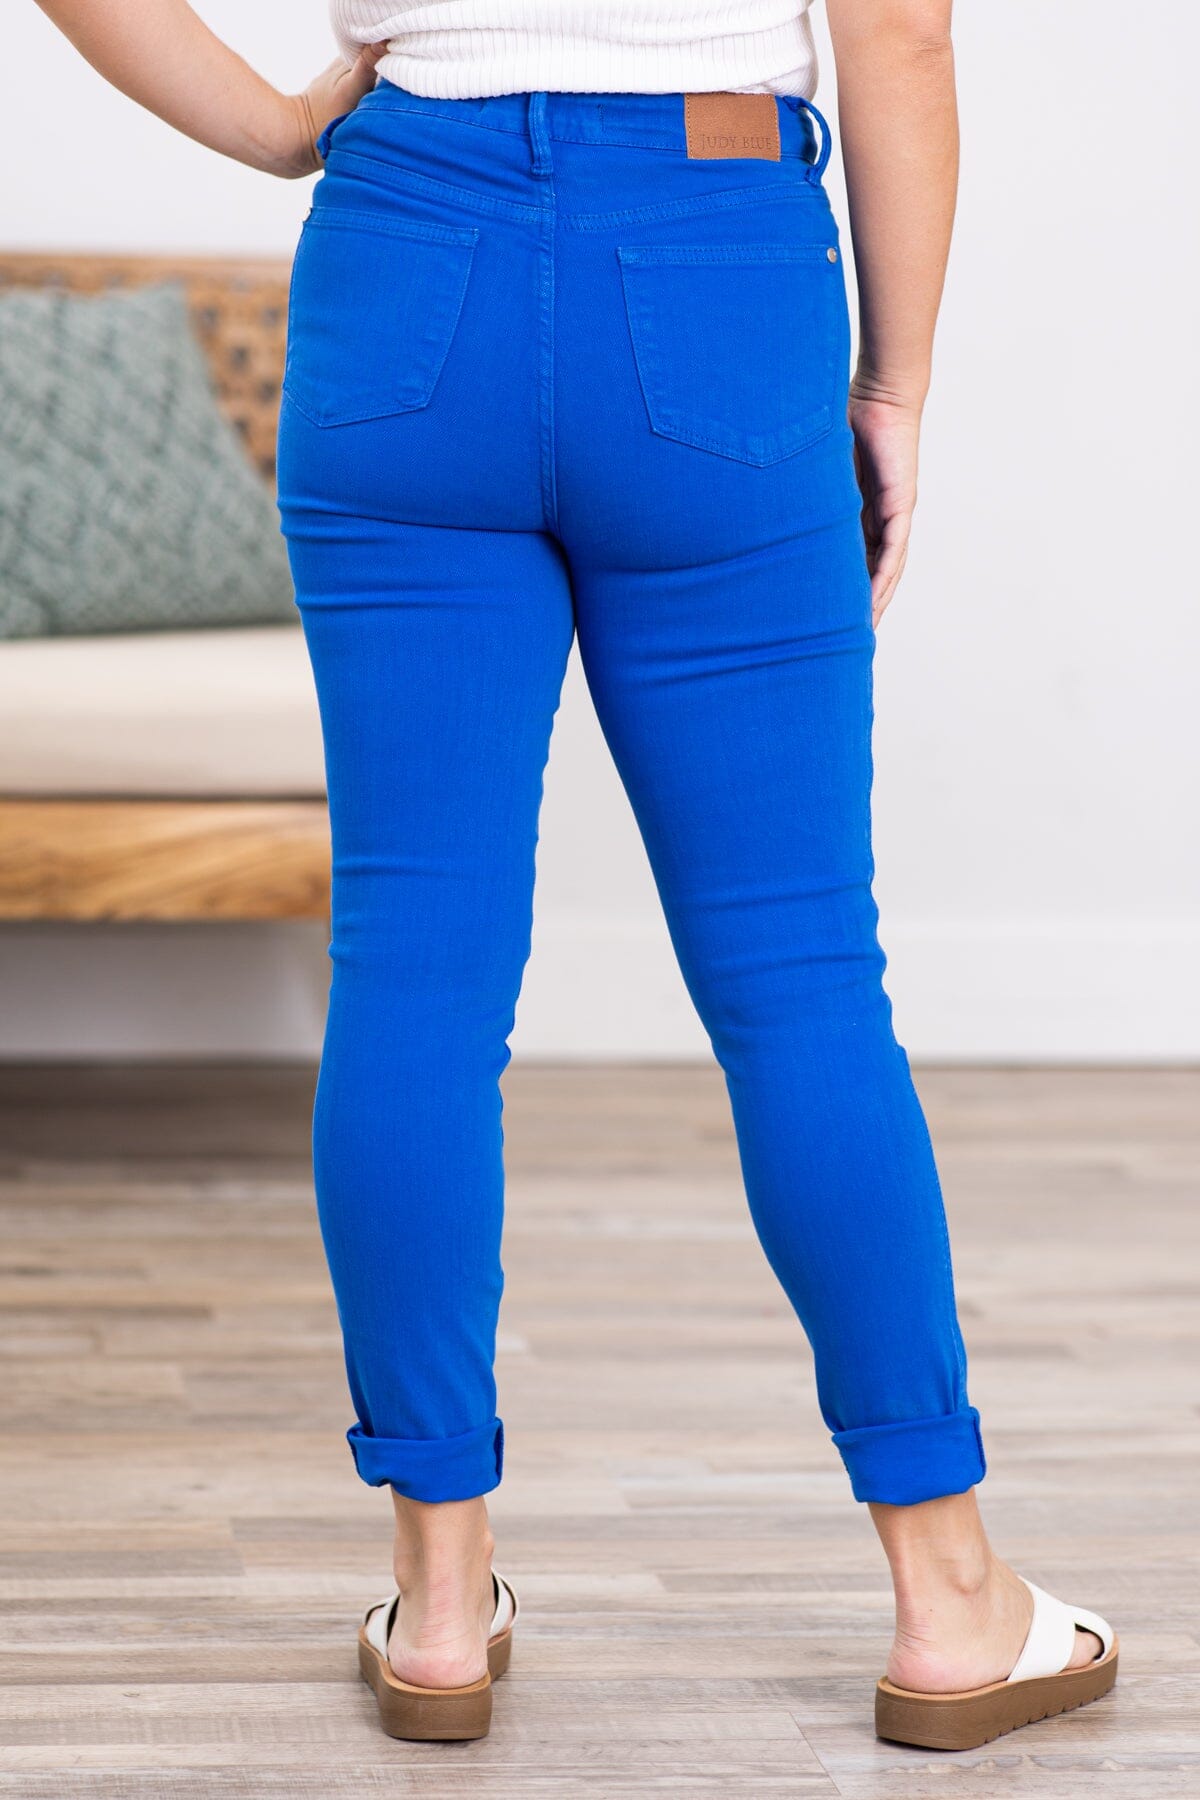 Judy Blue Cobalt Tummy Control Skinny Jeans - Filly Flair